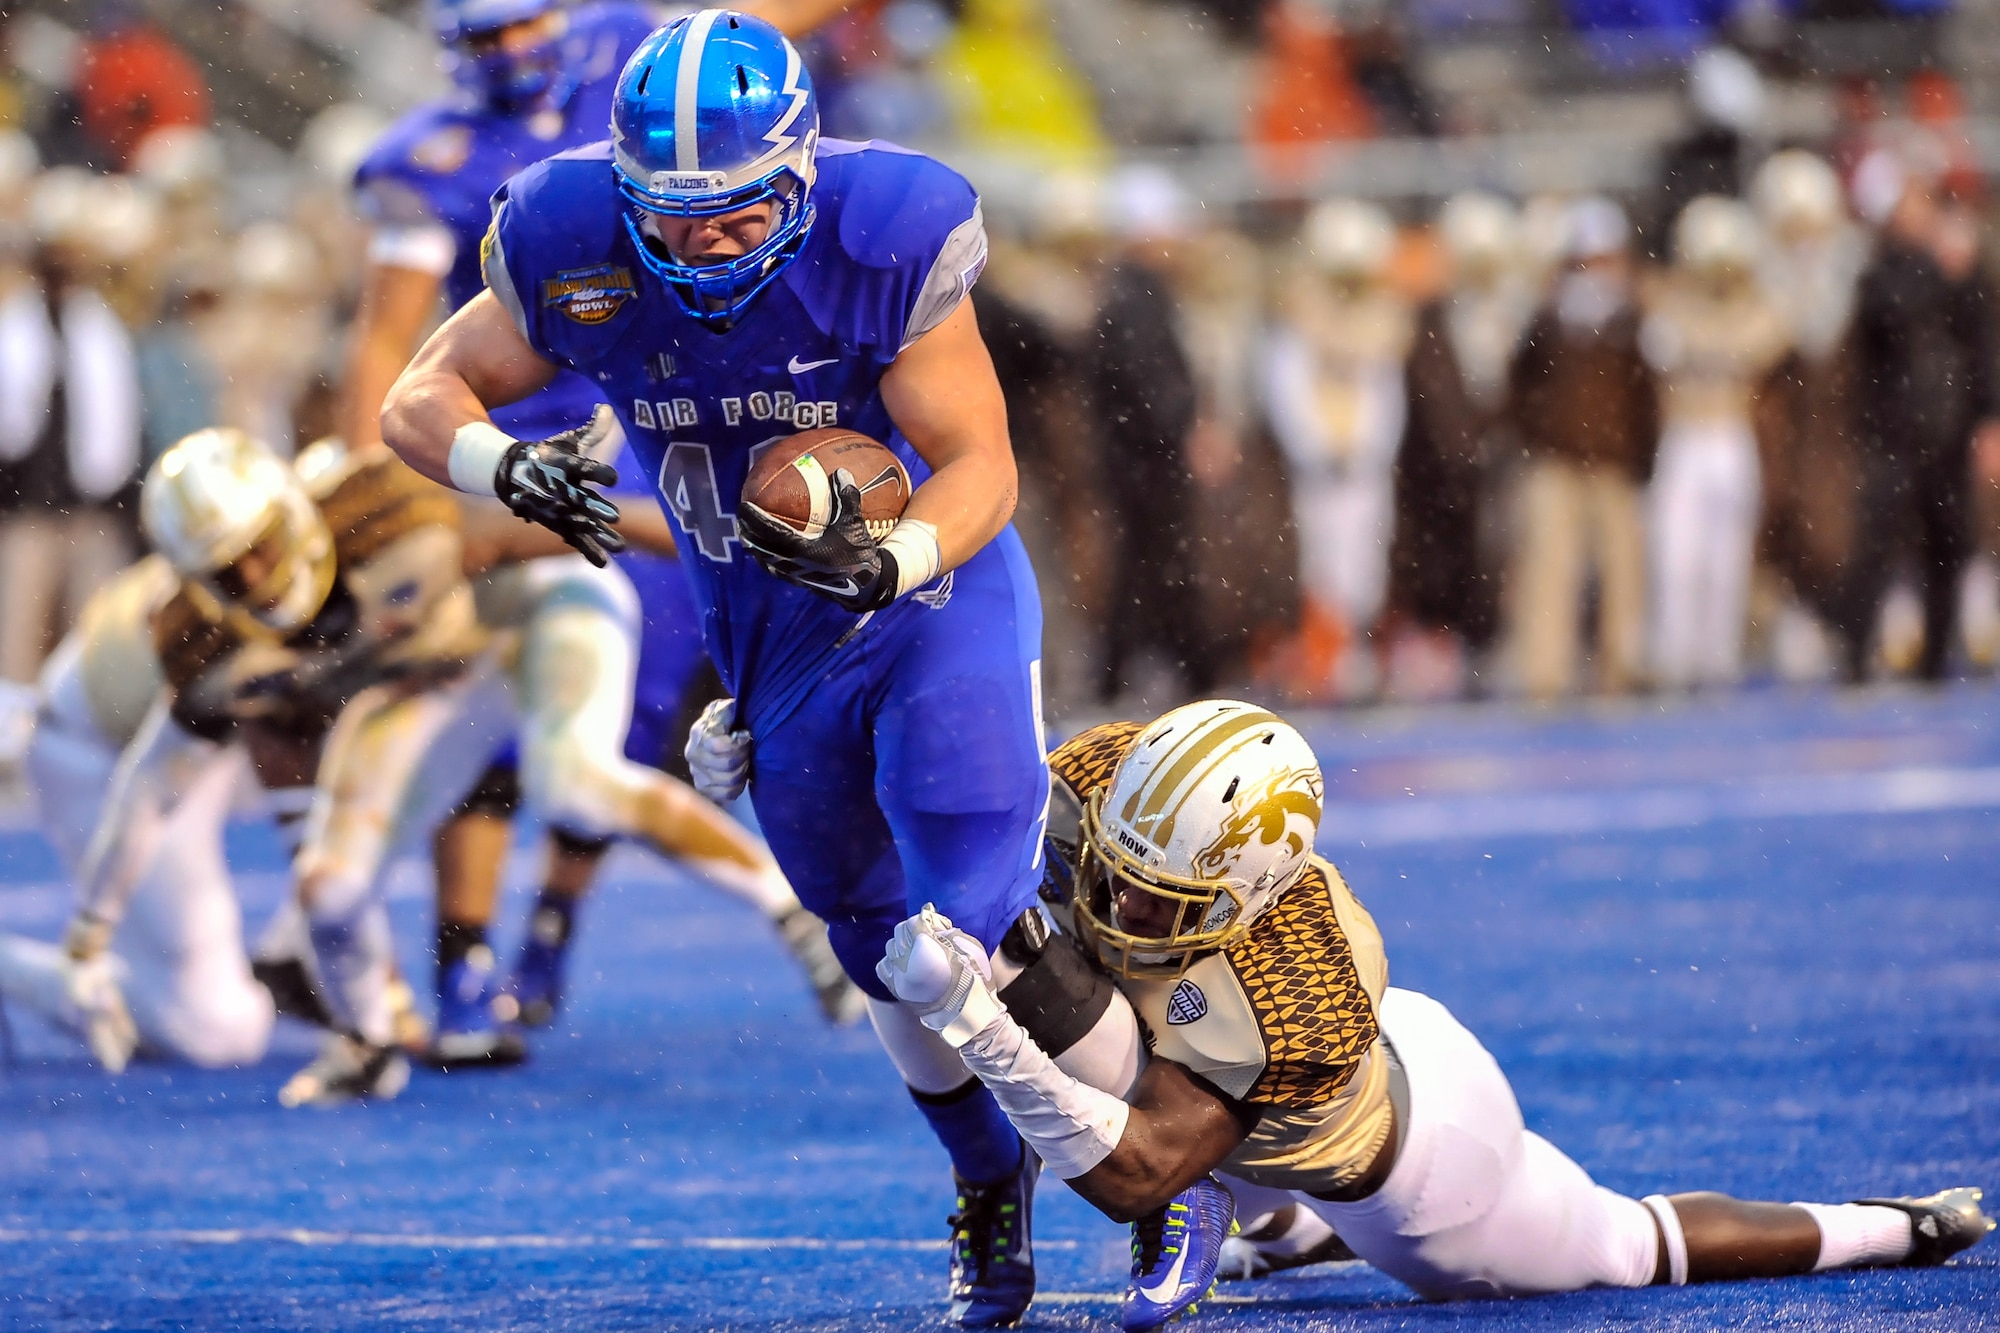 Air Force Falcons running back Shayne Davern powers his way to the Western Michigan Broncos 3-yard line in the first half of the Famous Idaho Potato Bowl Dec. 20, 2014, in Boise, Idaho. The Falcons defeated the Broncos 38-24, with Davern running for 101 yards and two touchdowns. (U.S. Air Force photo/Liz Copan)